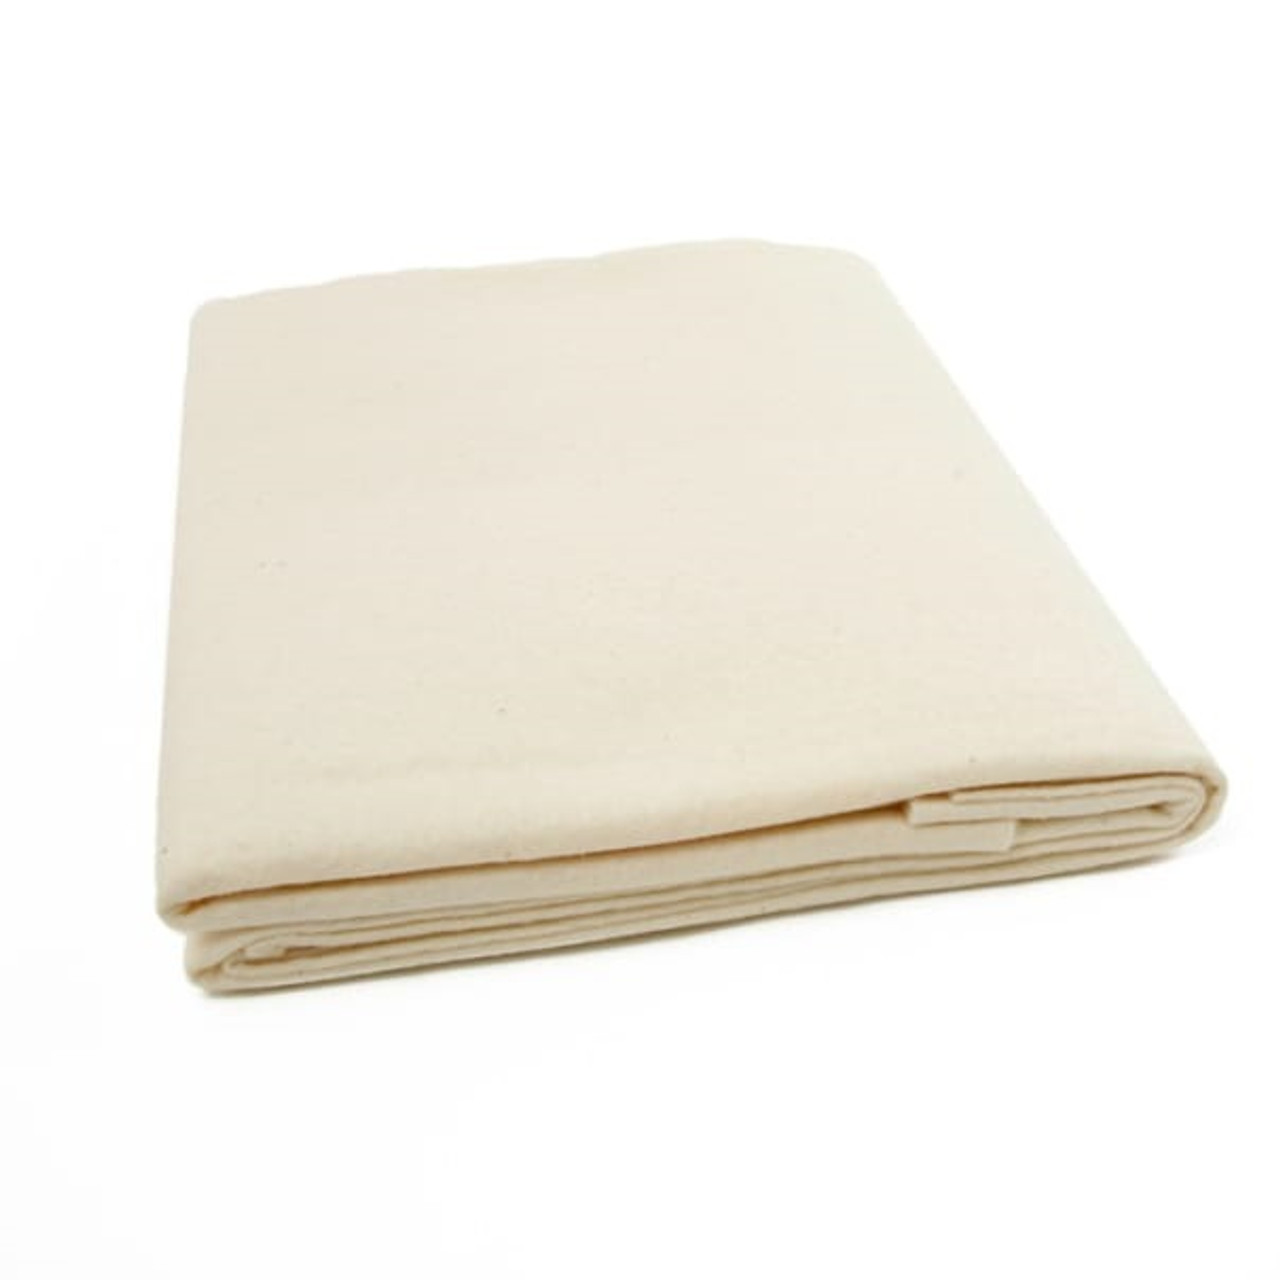 Throw Quilt Batting for Quilting, 60X60 Natural Cotton Quilting Batting  Fabric for Sewing